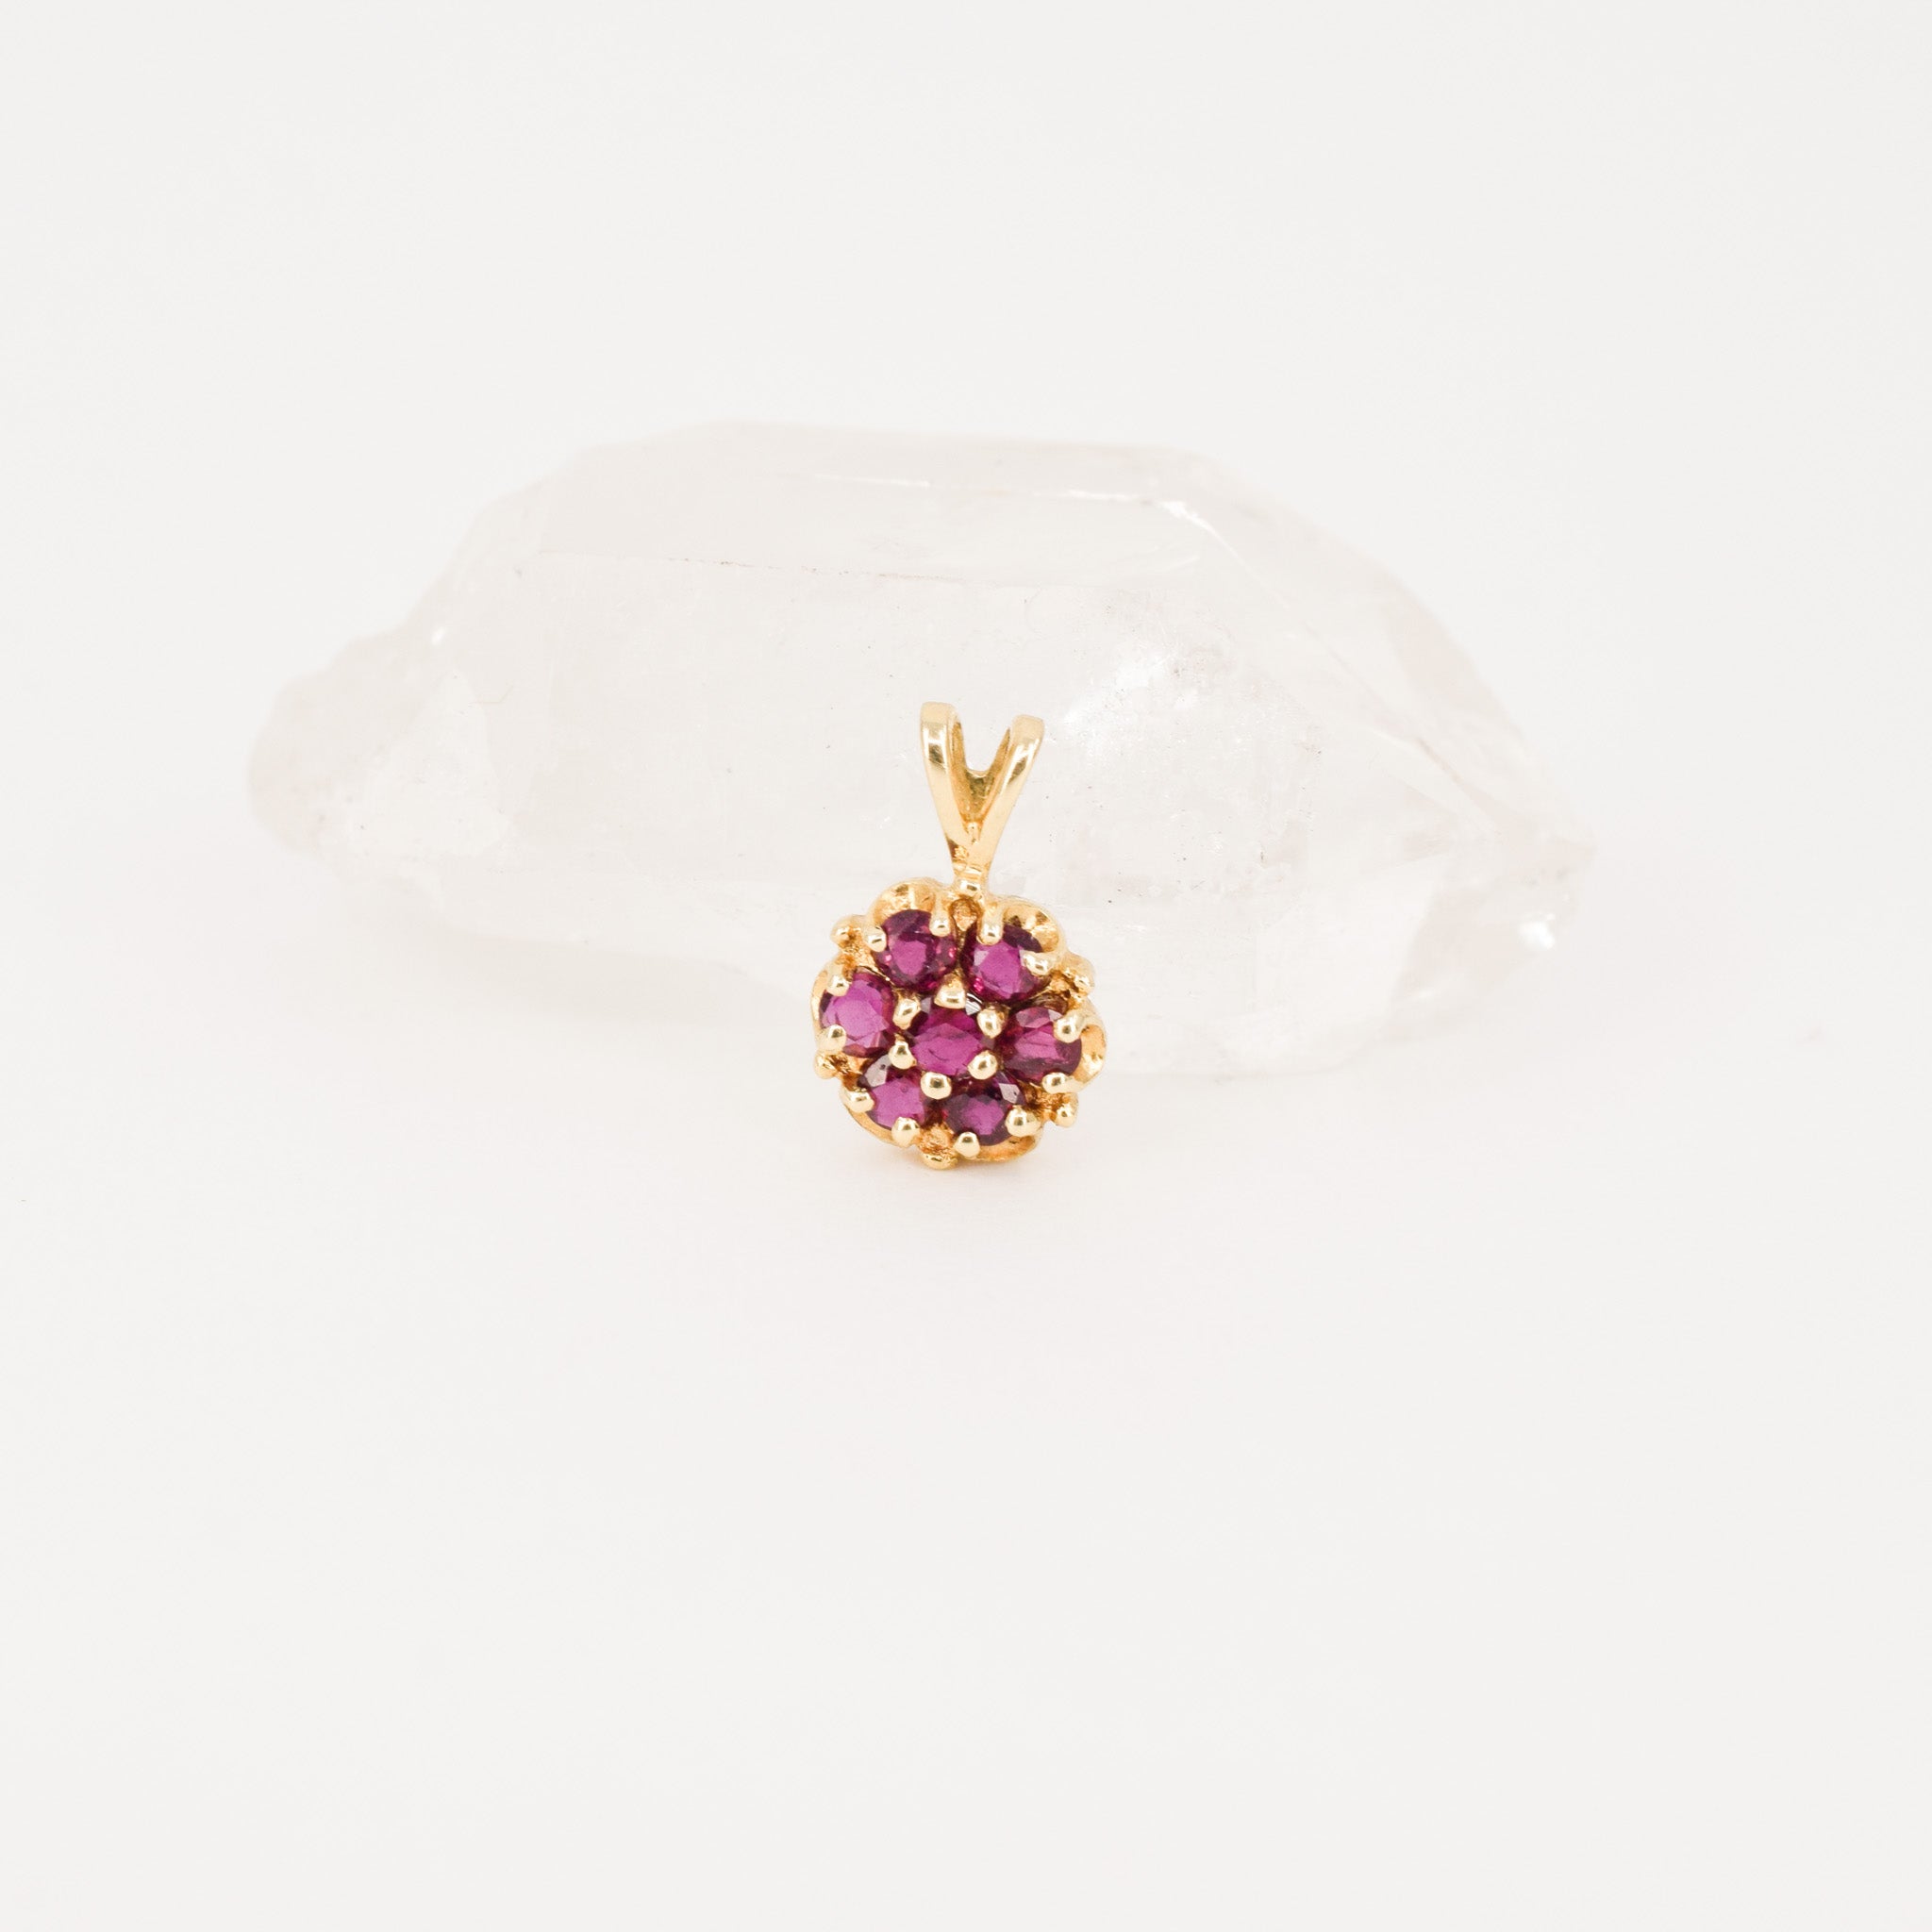 Floral ruby pendant, folkor vintage jewelry canada